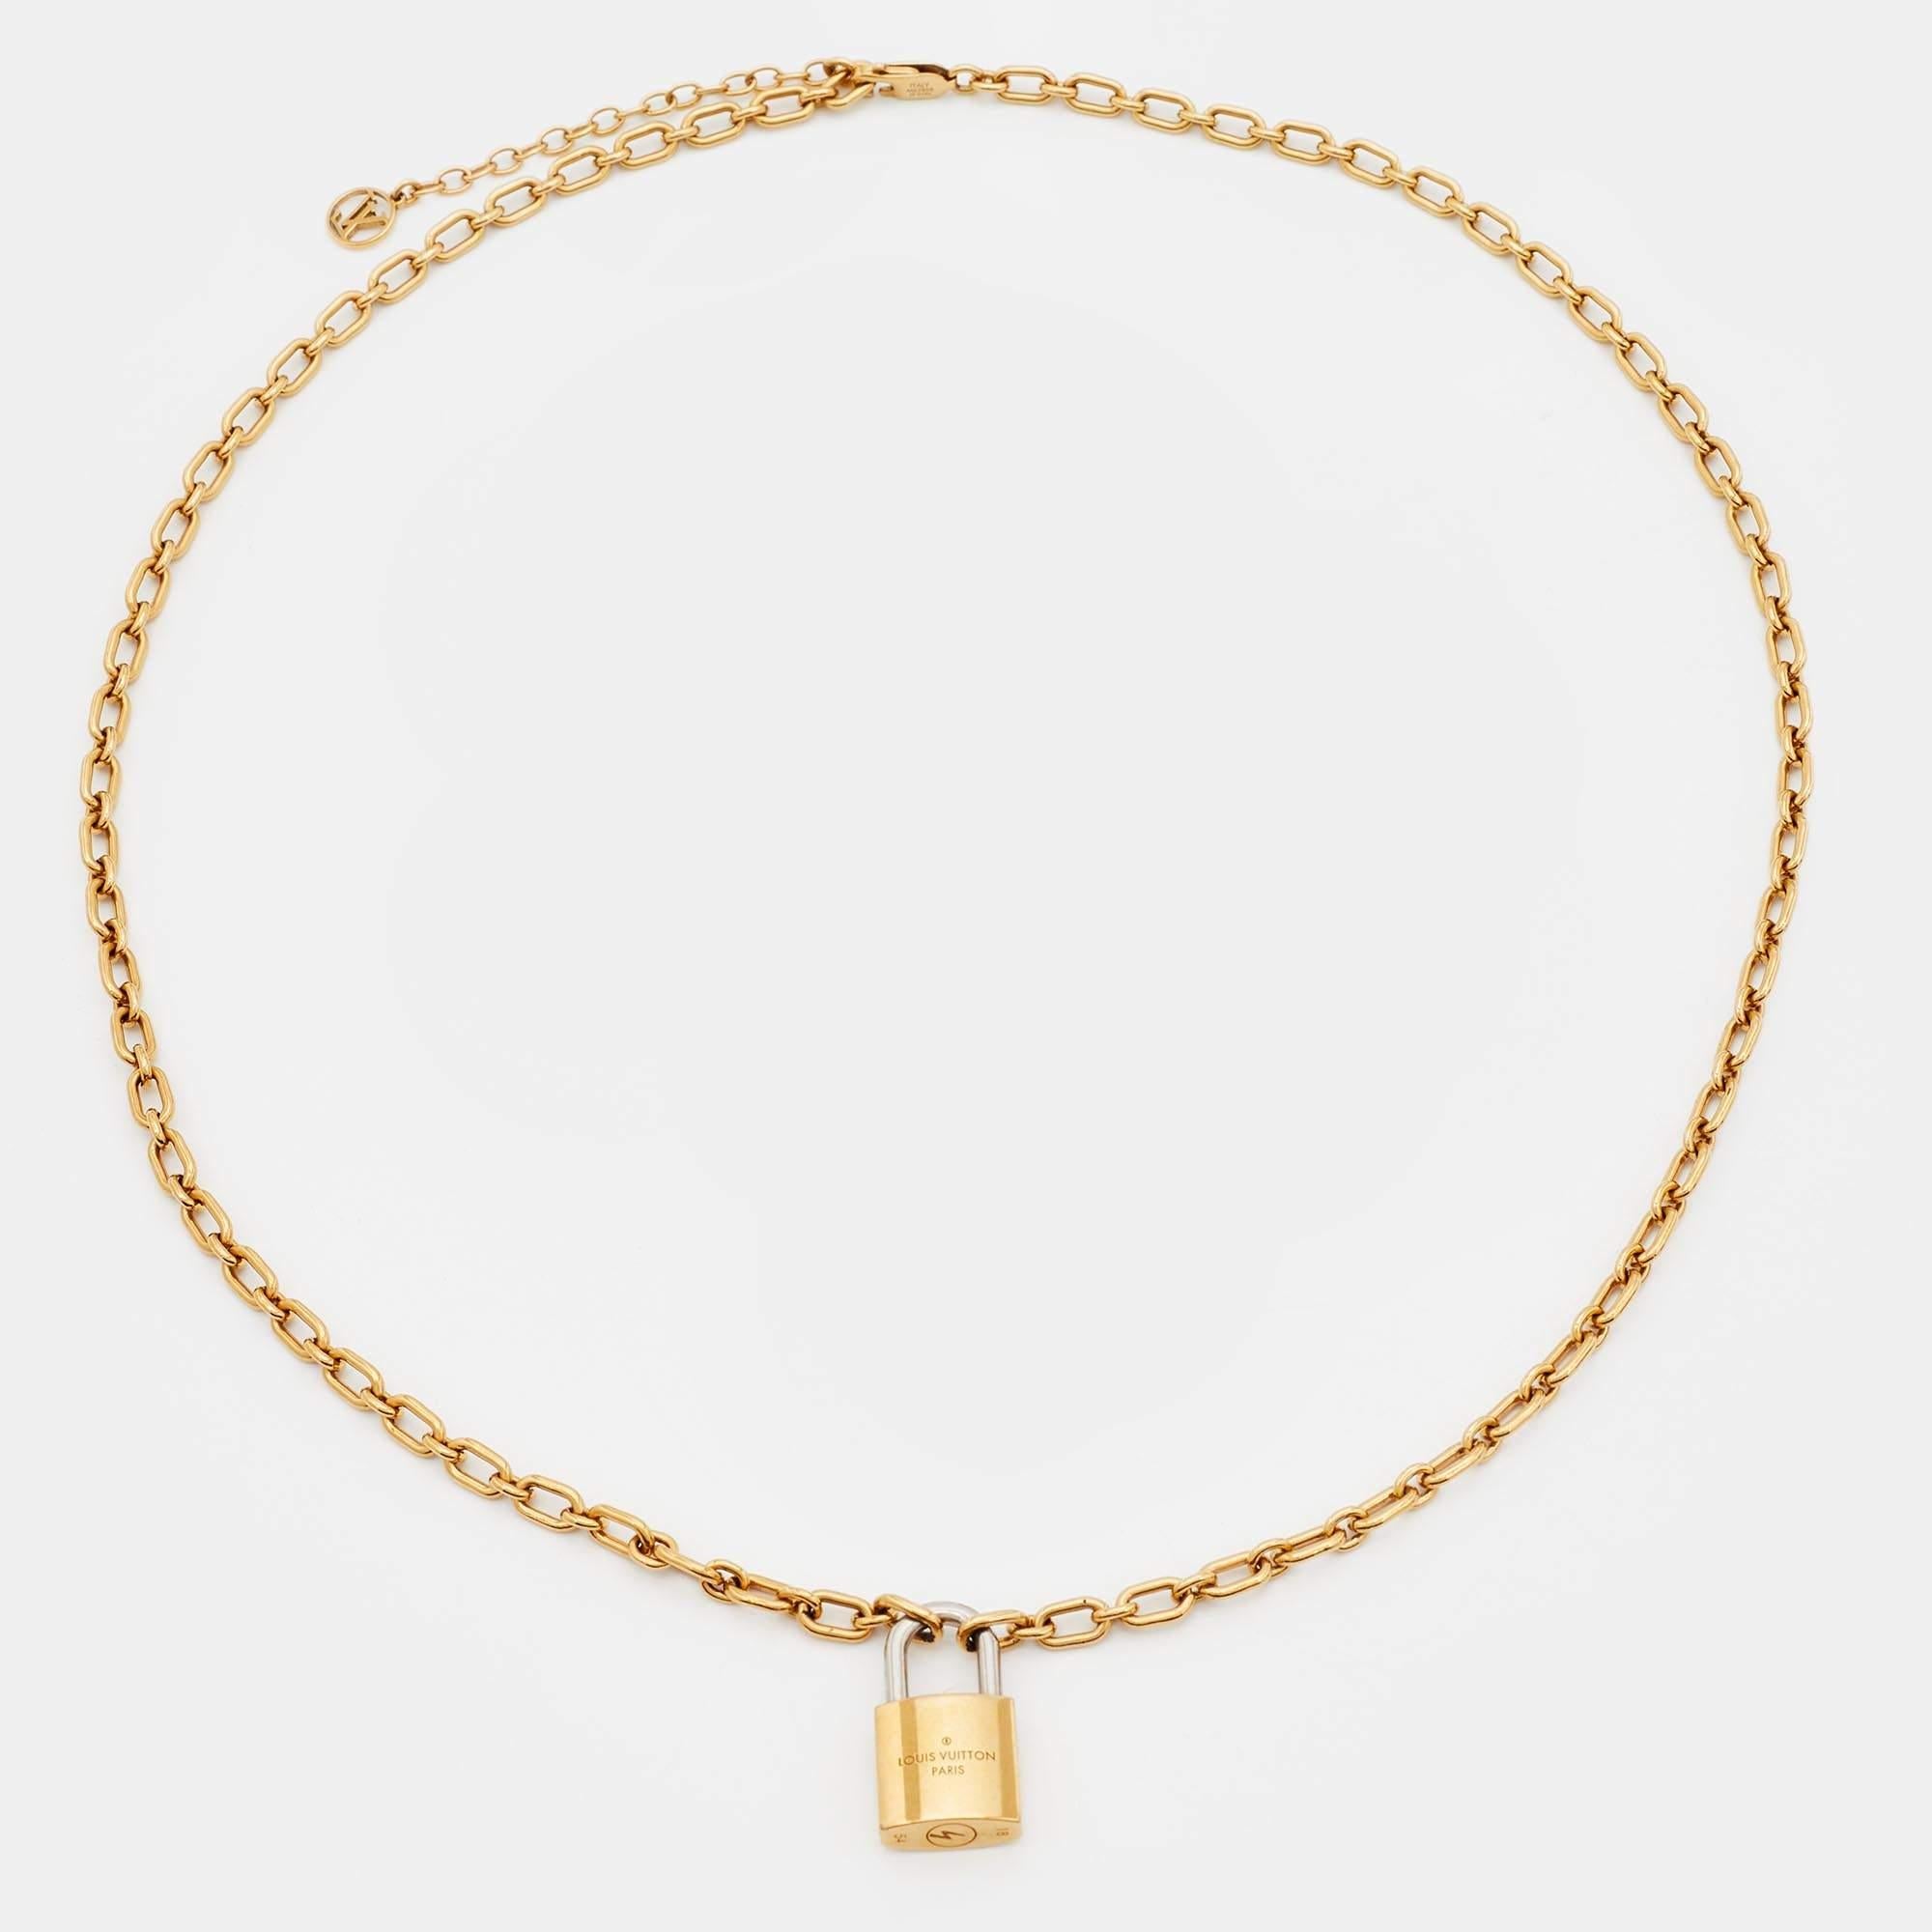 Define your neck with this Louis Vuitton pendant necklace. It is a masterfully-crafted creation that promises to hold its beauty and value for a long time.

